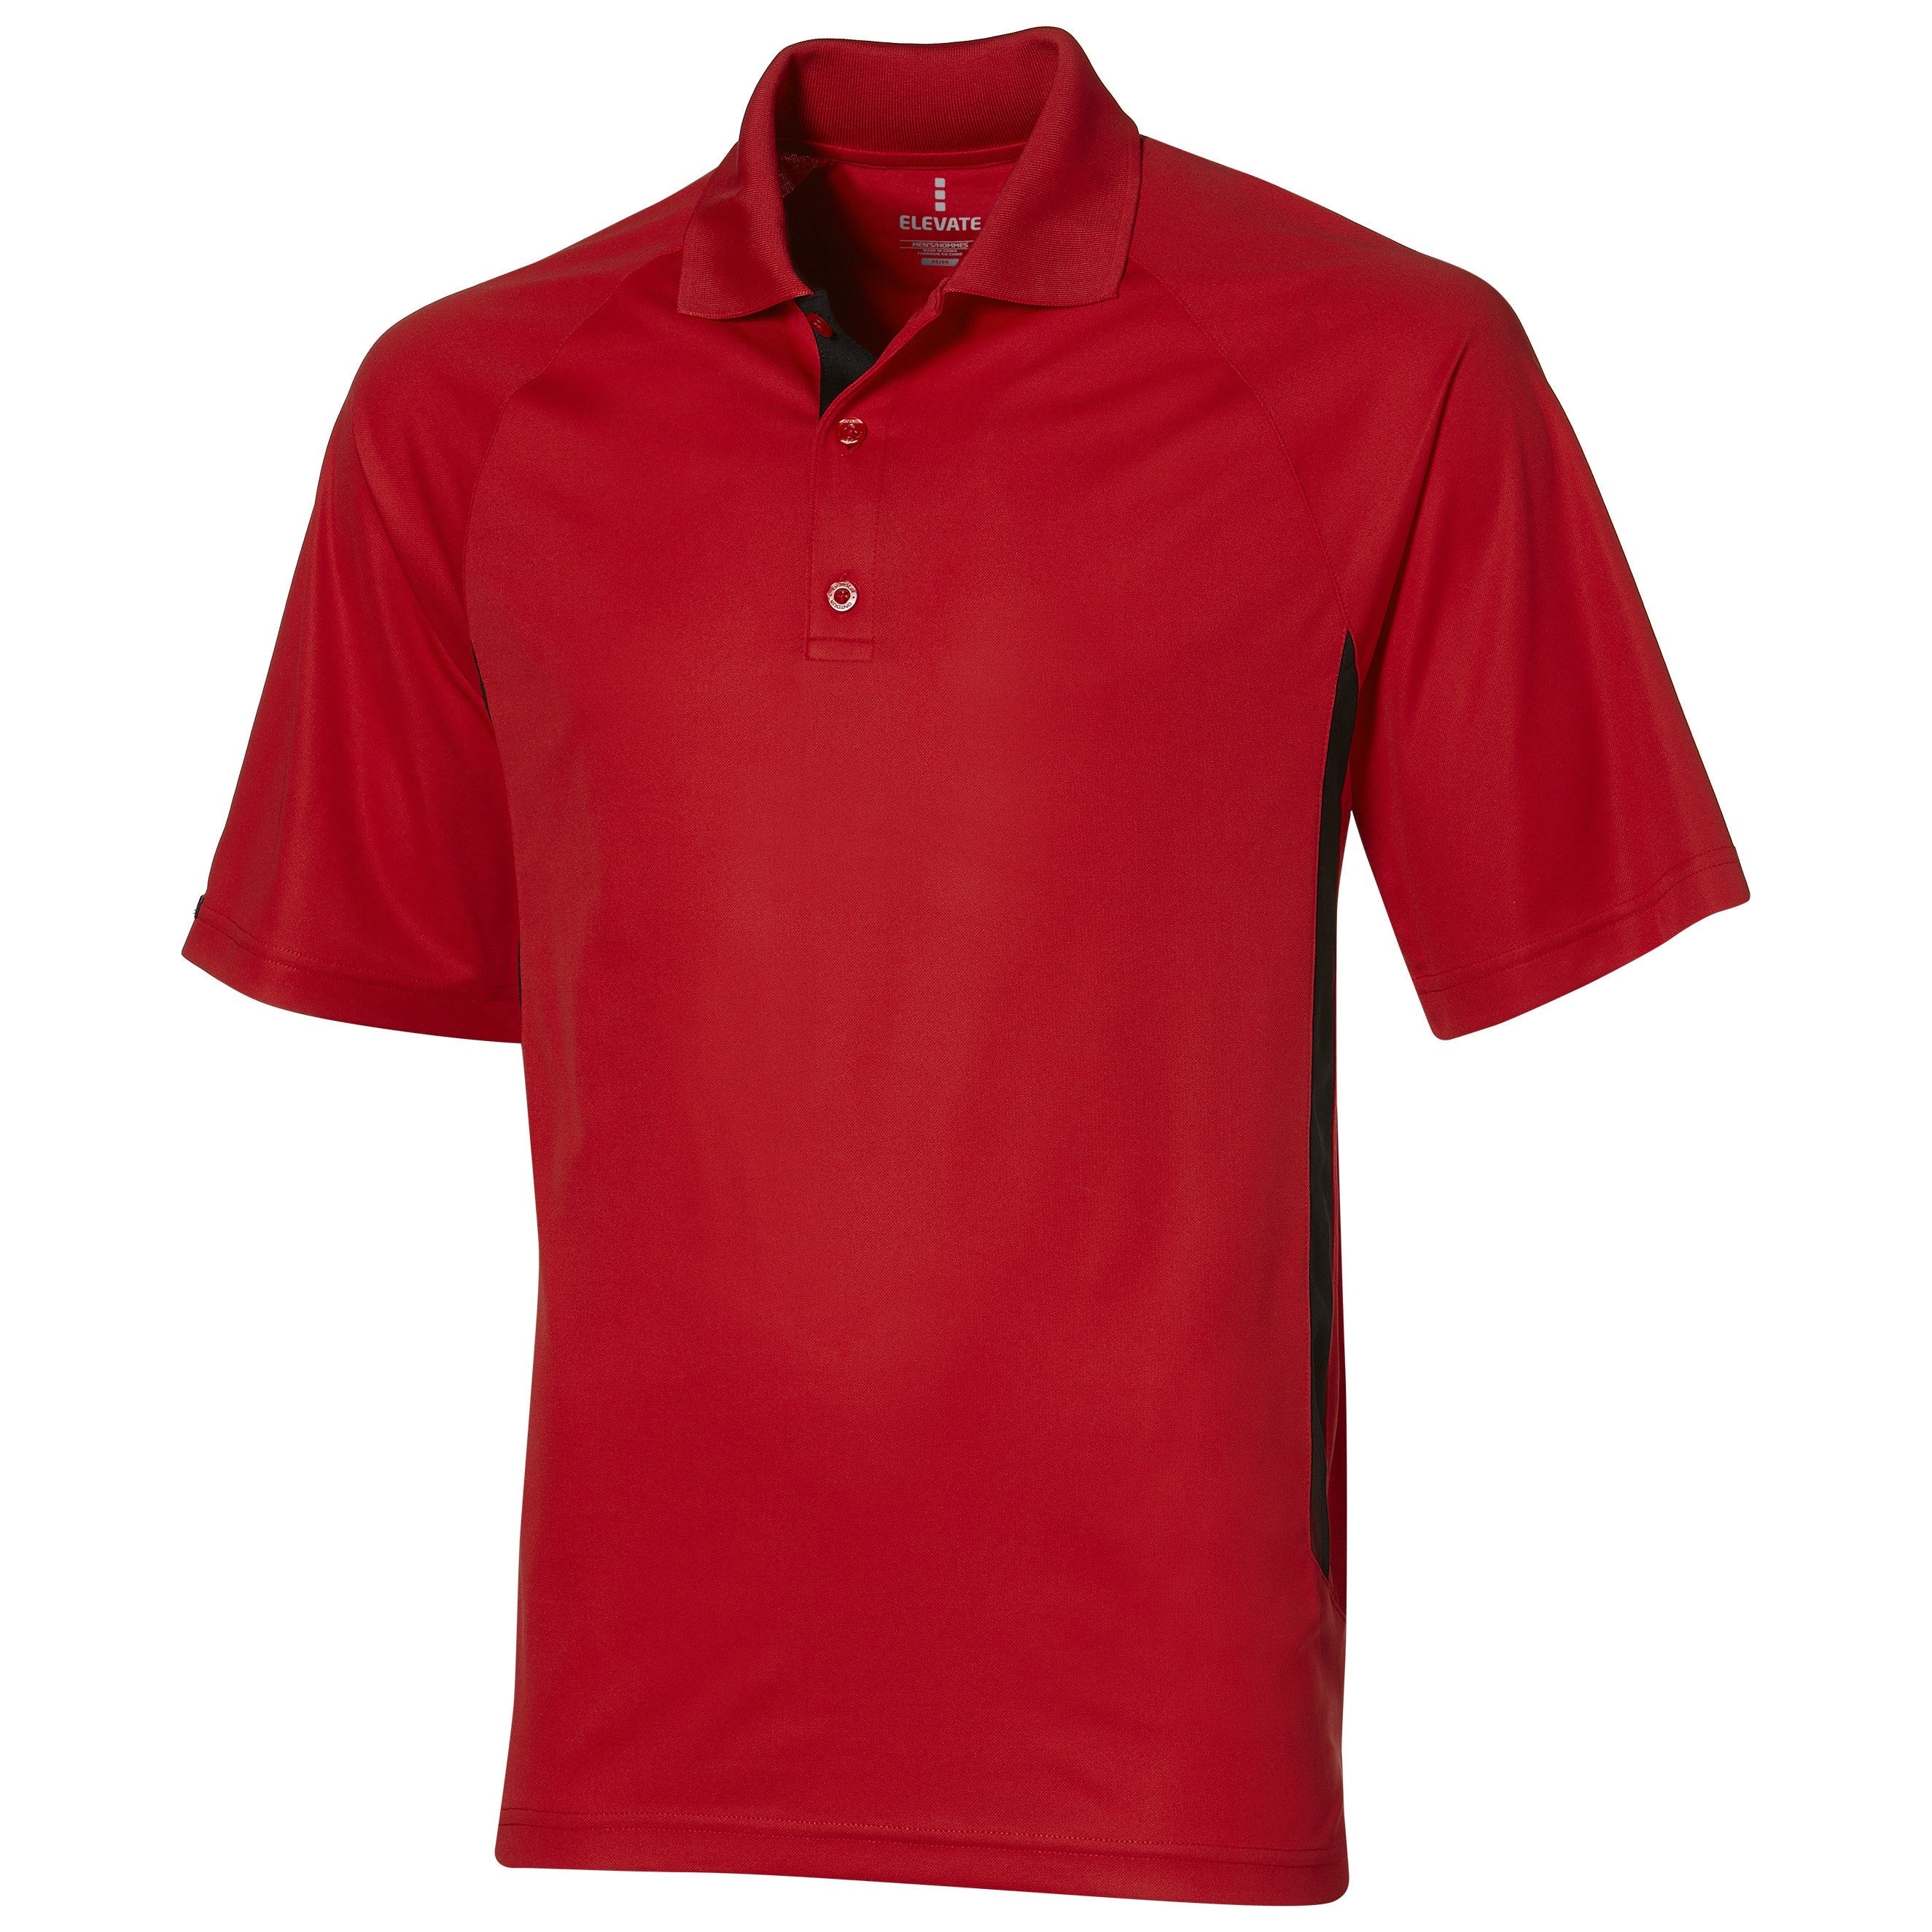 Mens Mitica Golf Shirt - Lime Only-2XL-Red-R